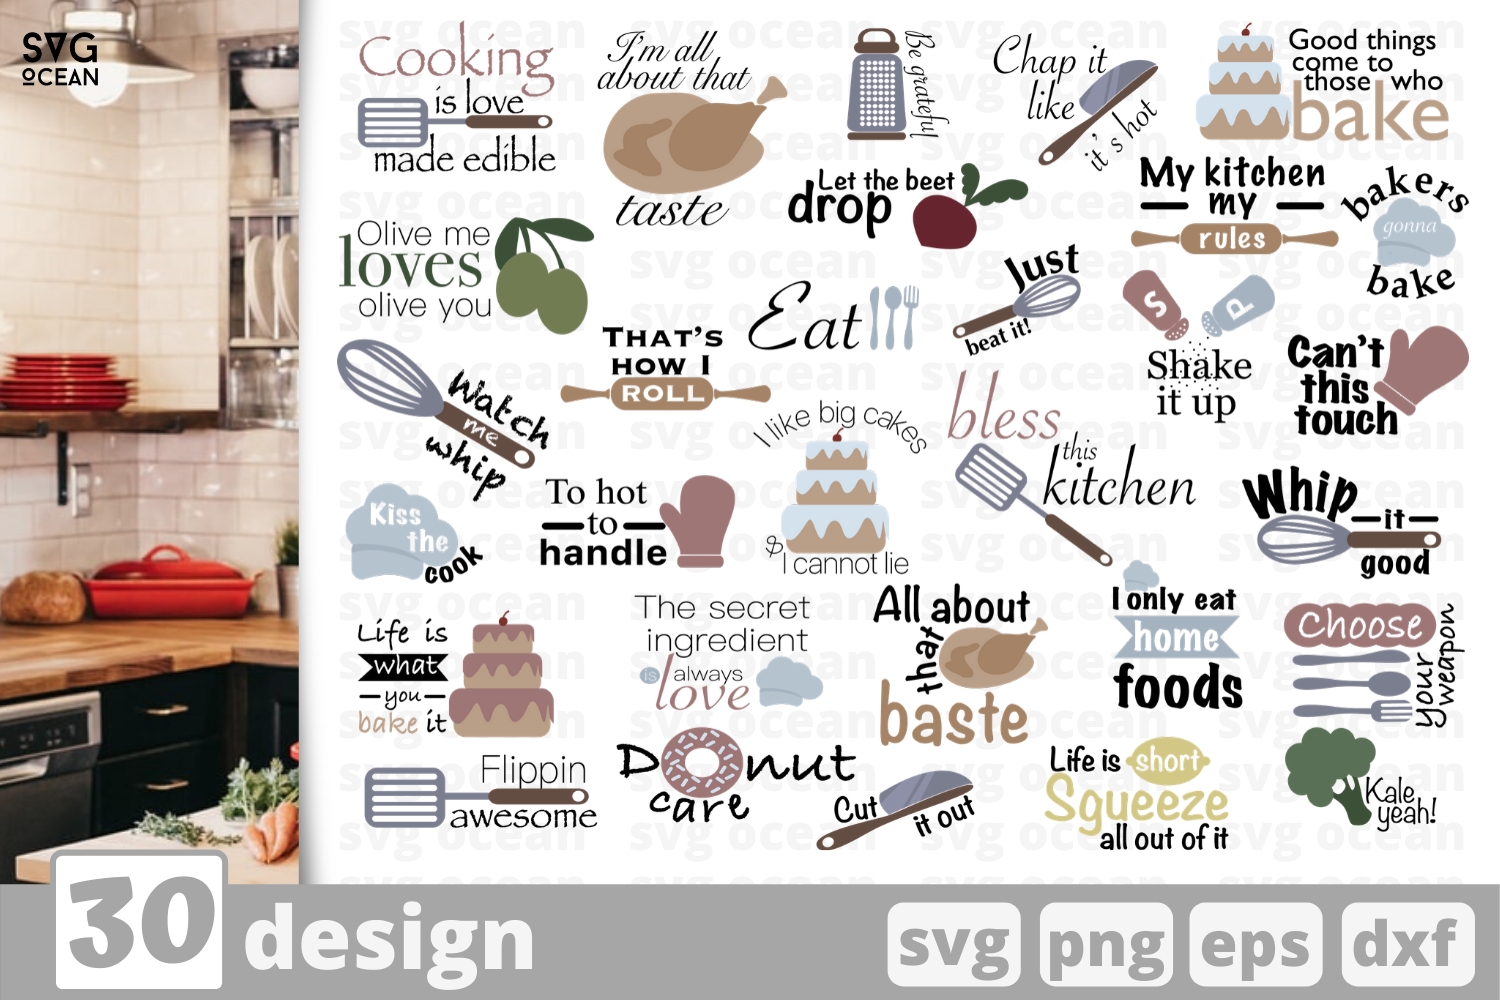 Download 30 Kitchen Quotes Svg Bundle Quotes Cricut Svg By Svgocean Thehungryjpeg Com SVG, PNG, EPS, DXF File